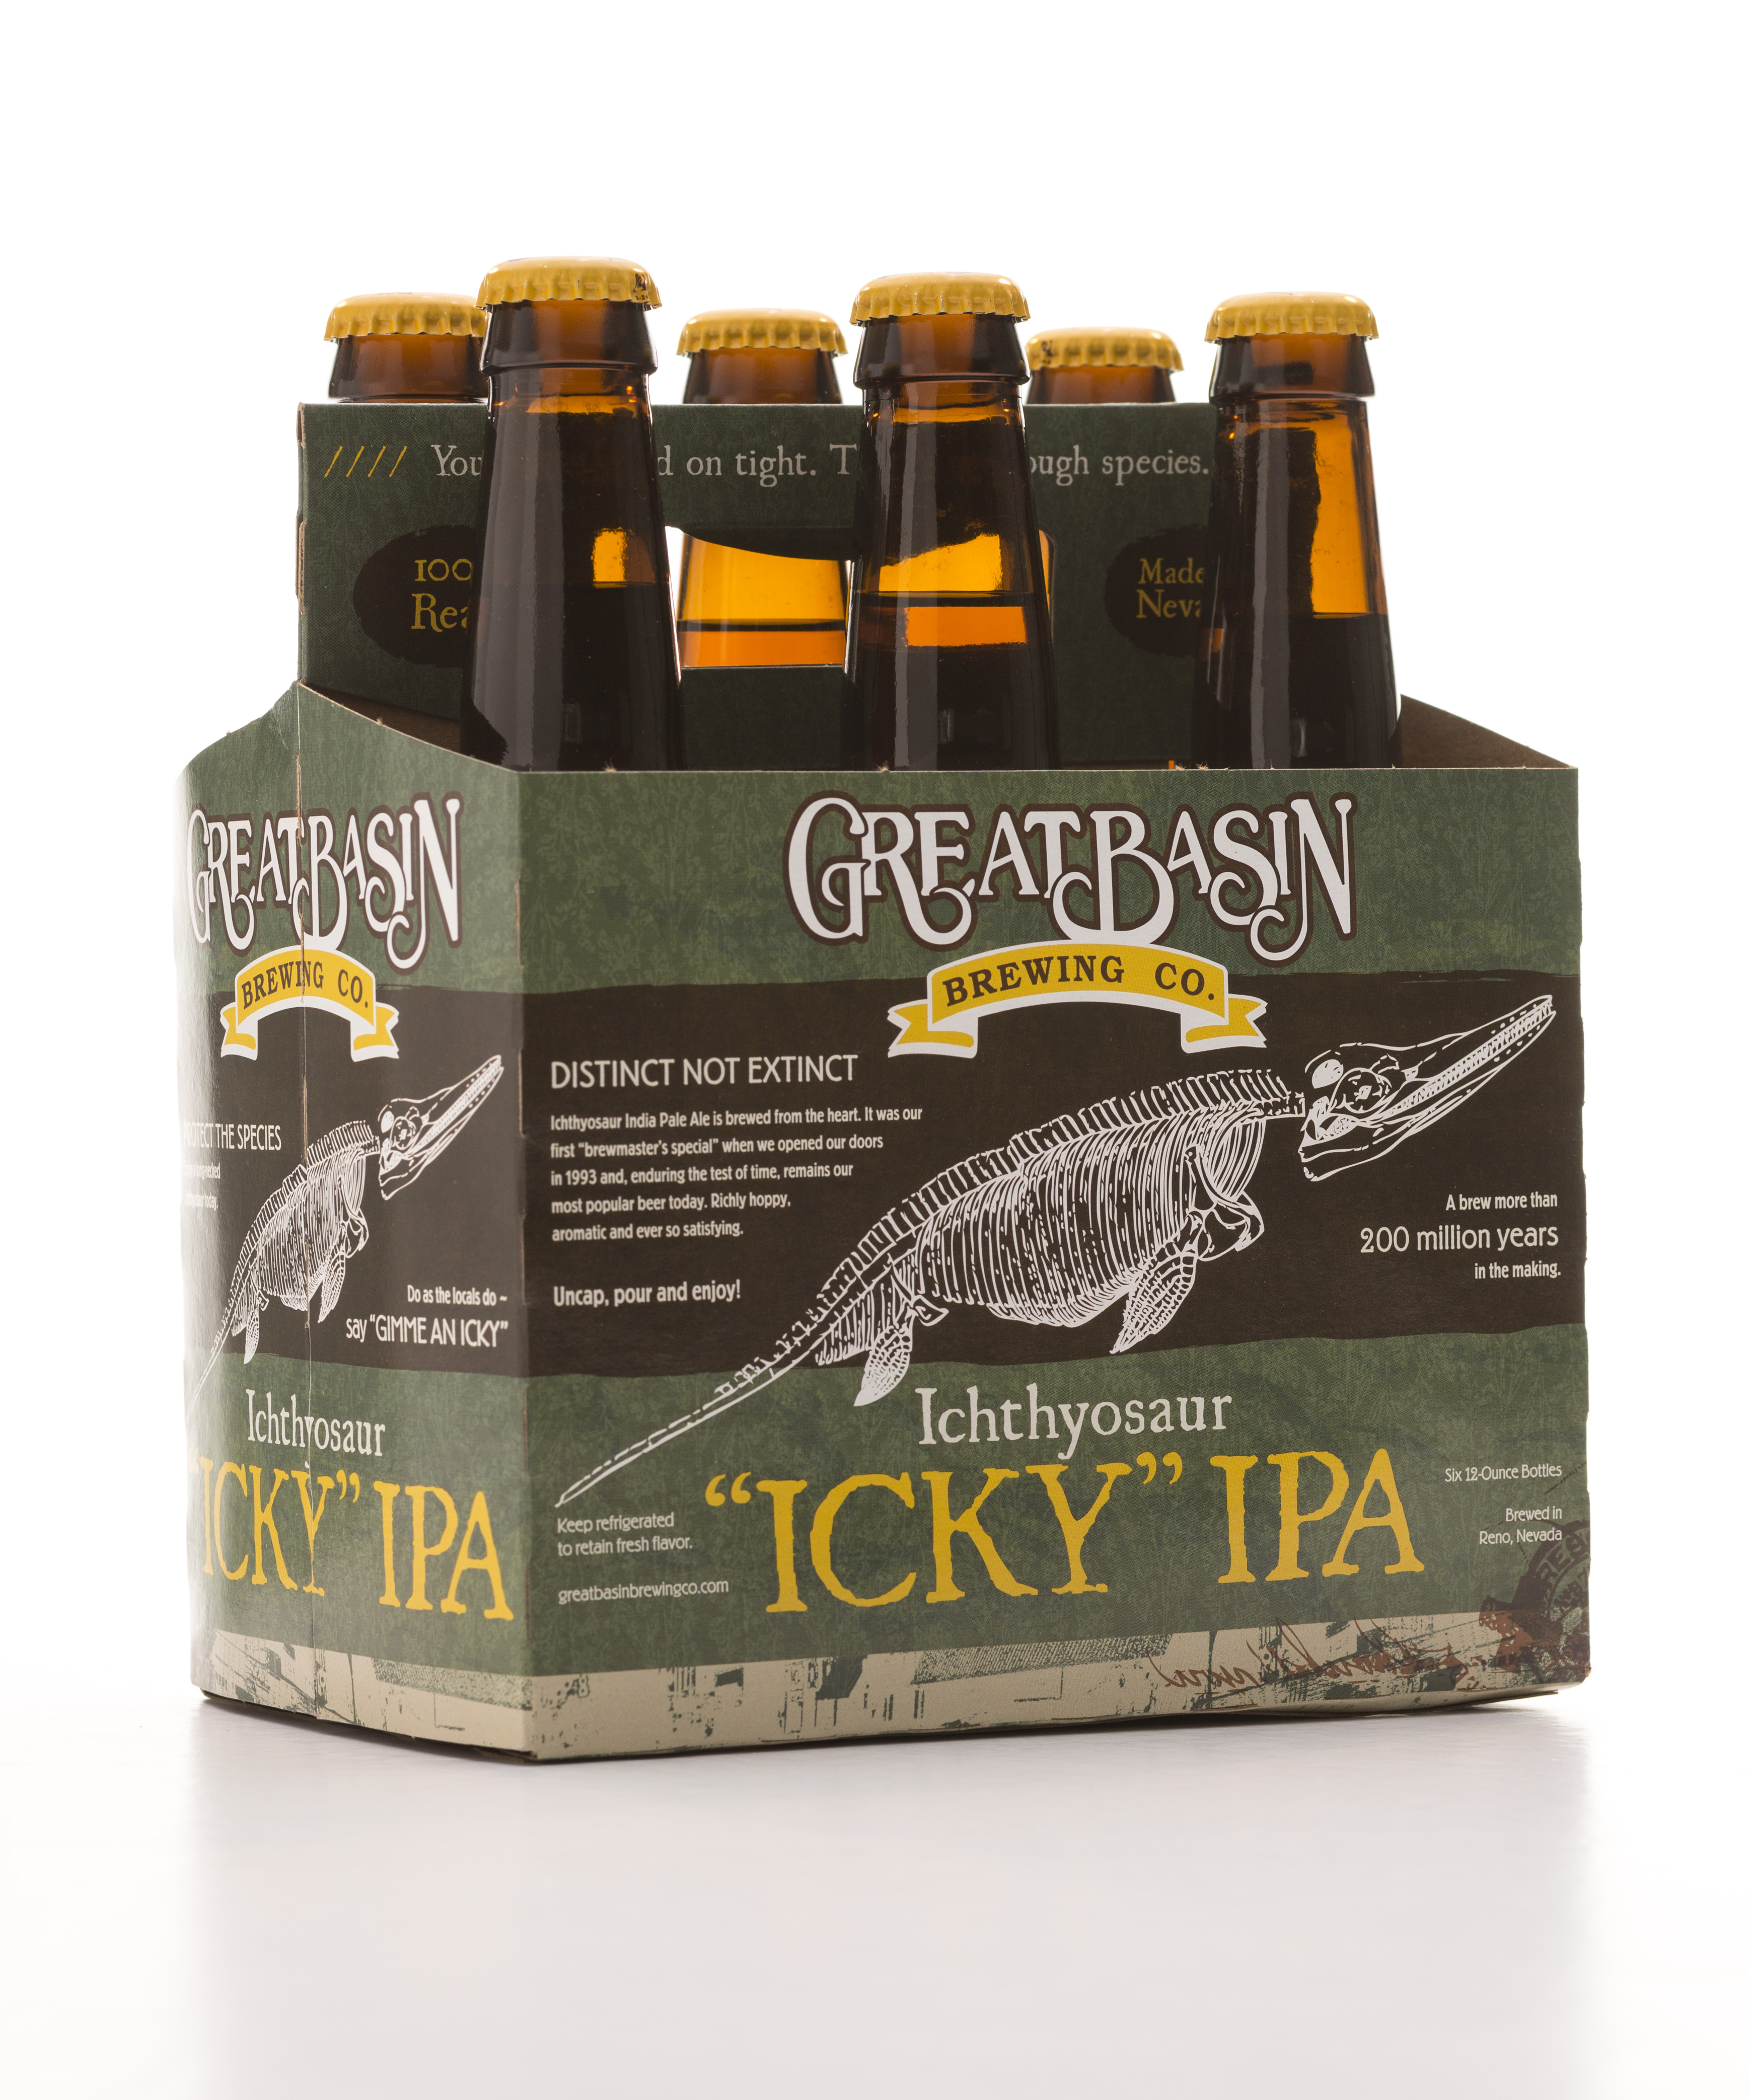 Ichthyosaur “ICKY” IPA brewed by Great Basin Brewing Co. in honor of Nevad’s state fossil.